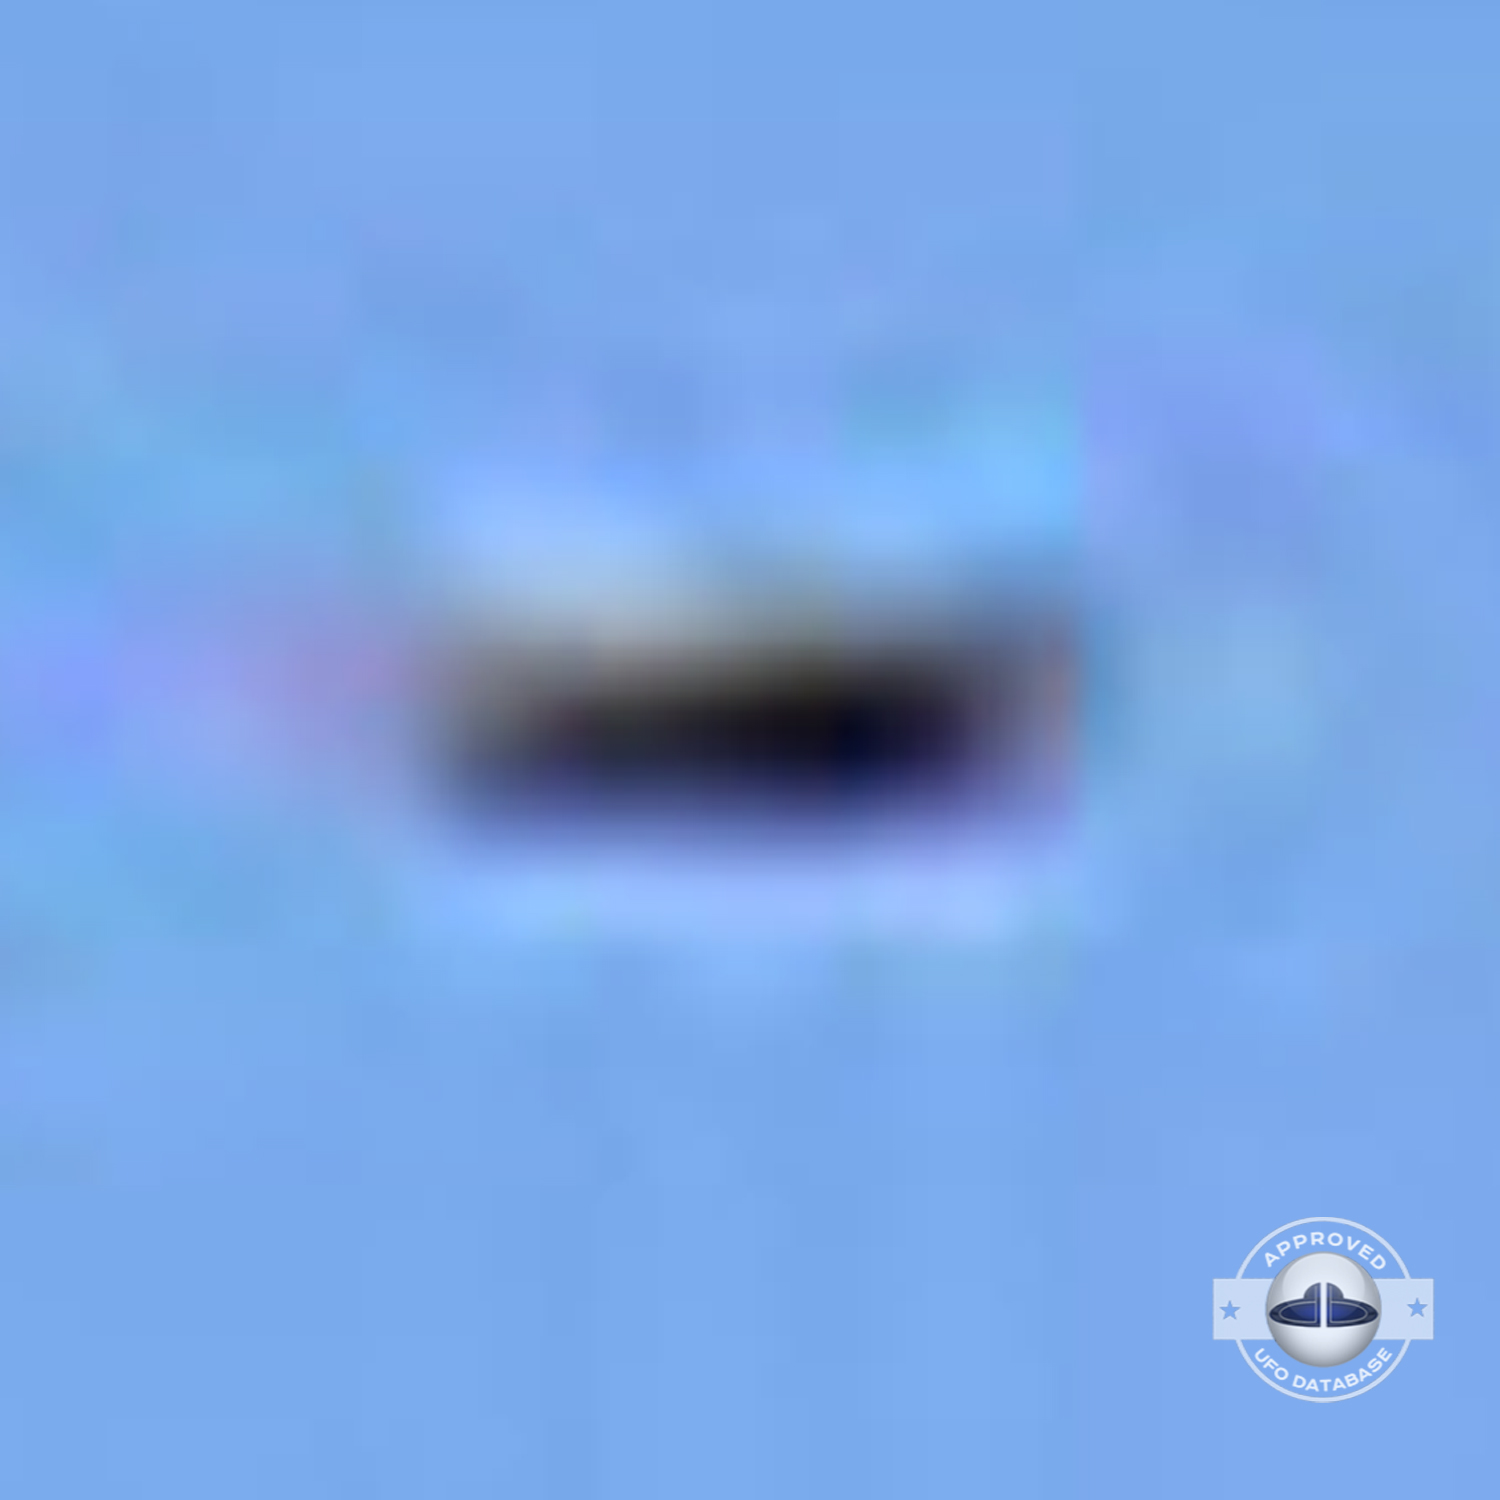 UFO picture taken in Tasmania on A10 highway going from south to north UFO Picture #80-6